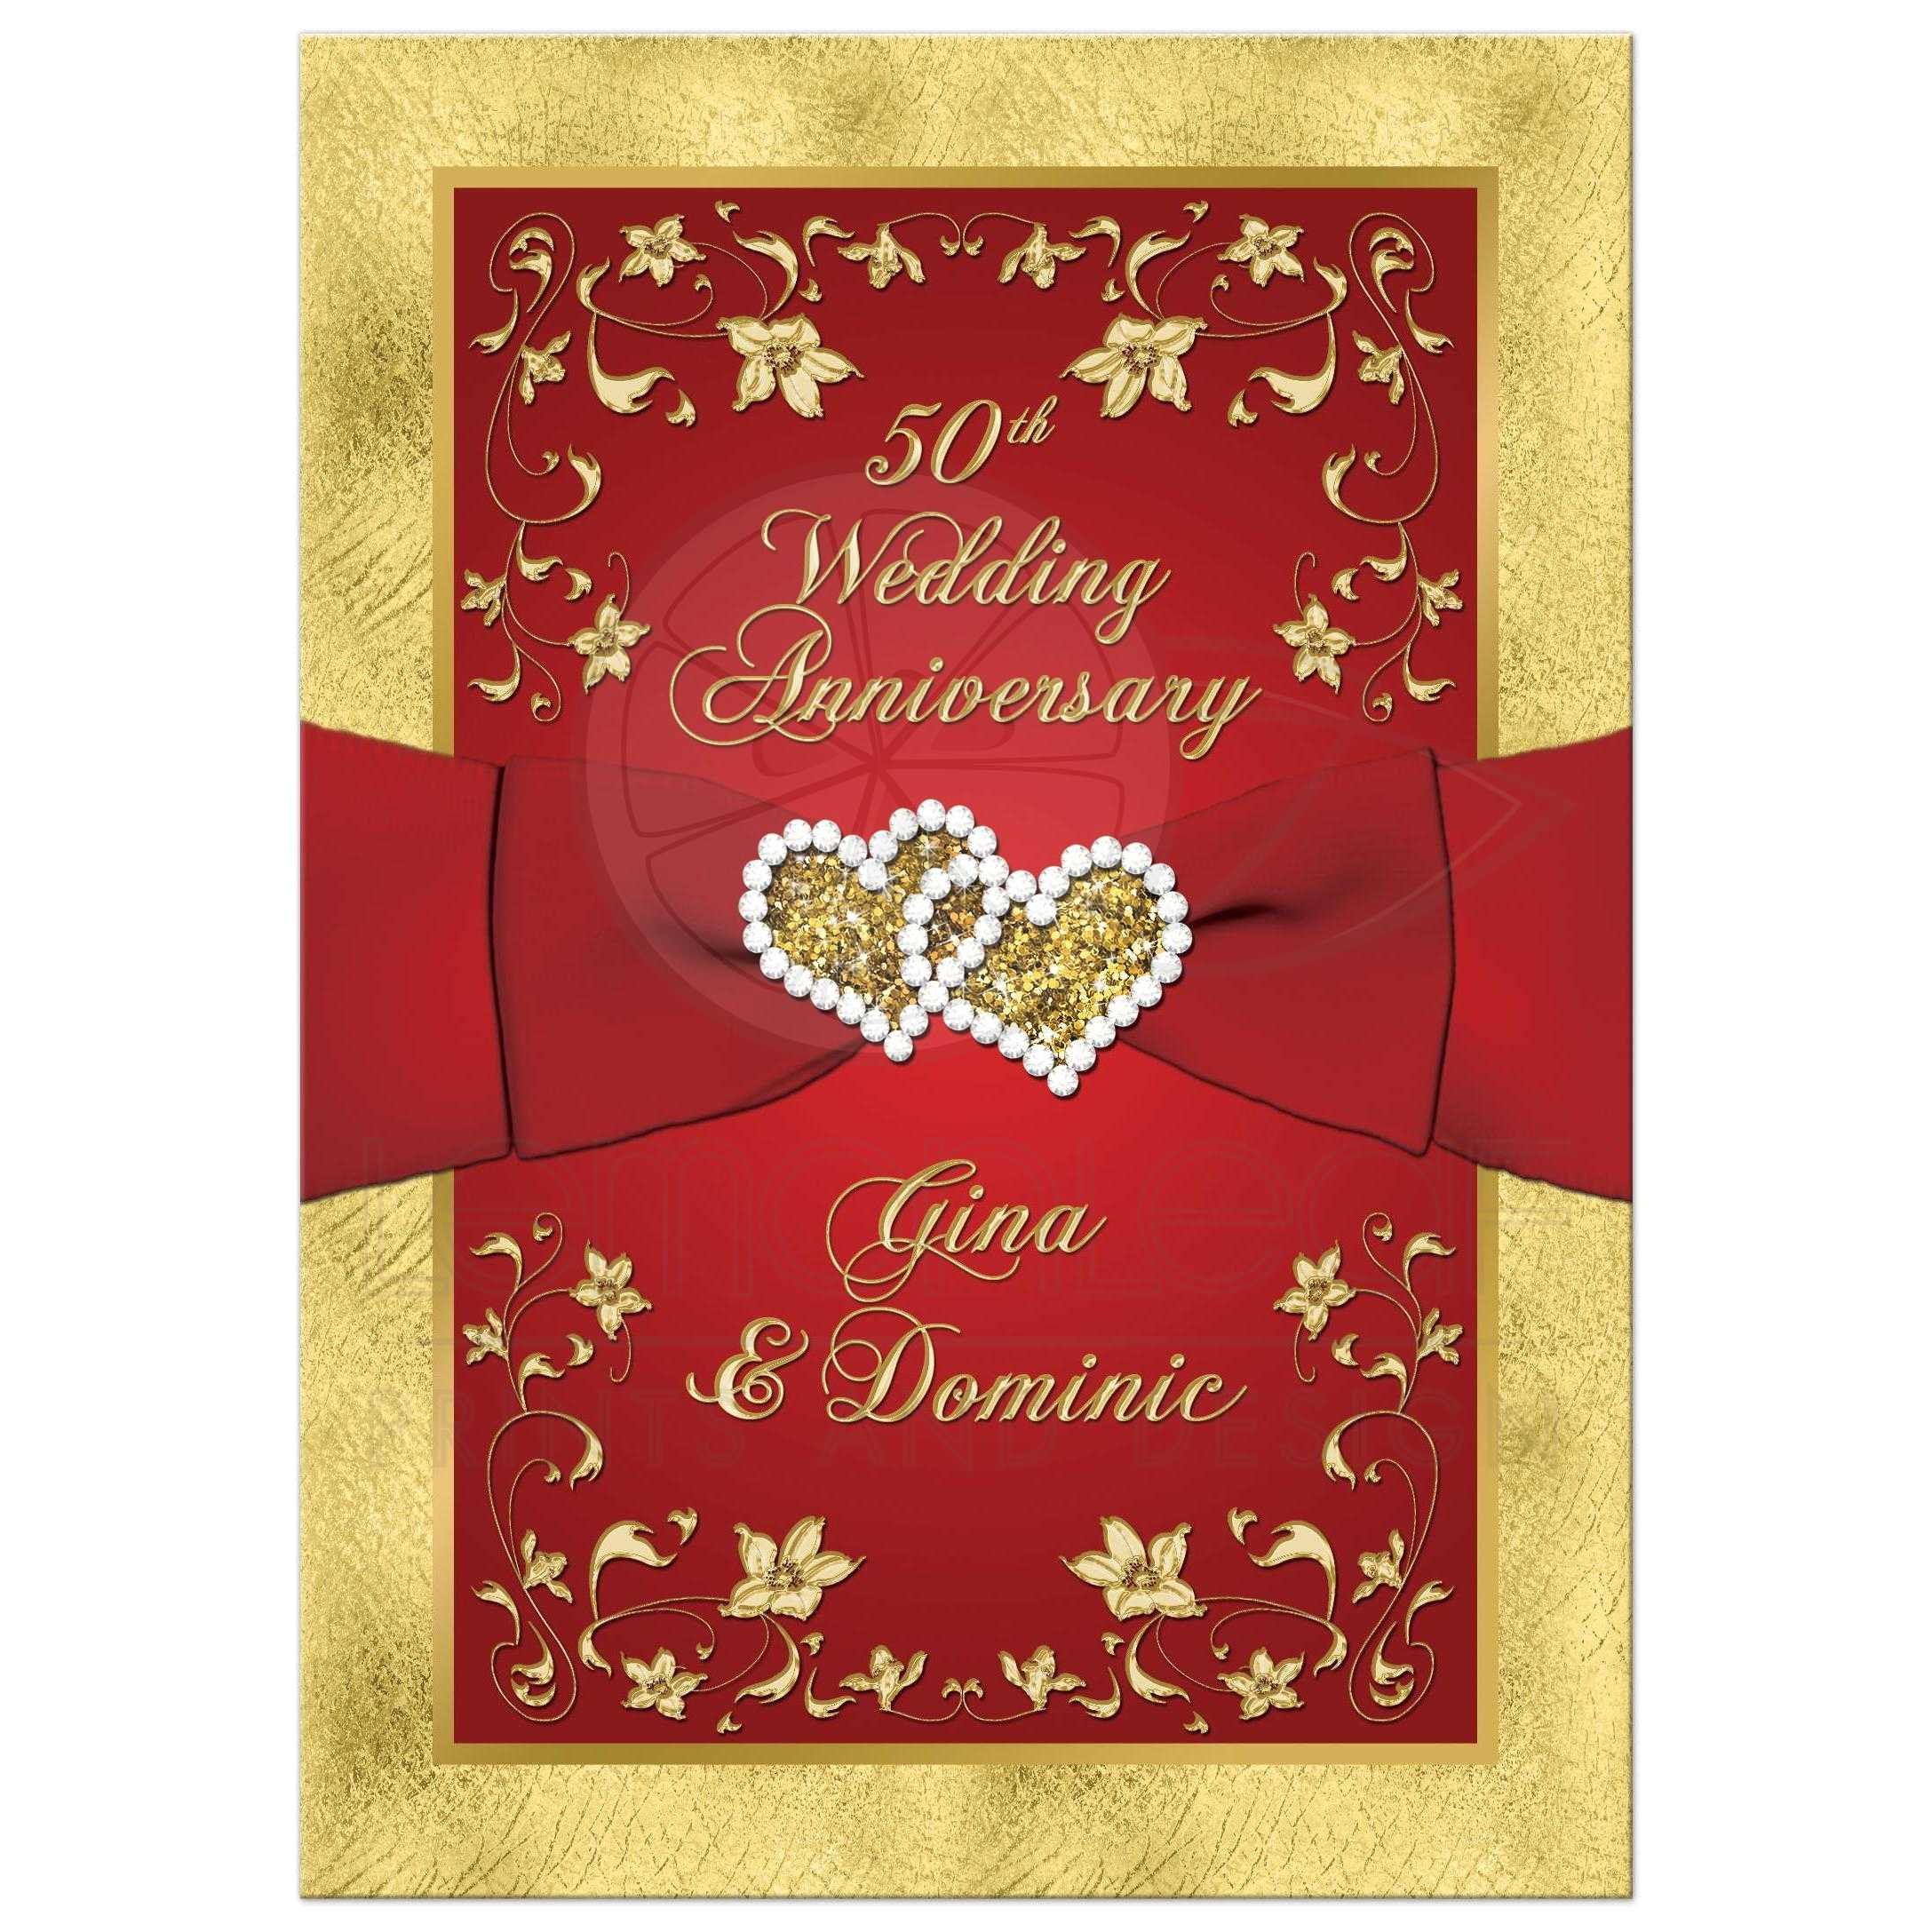 50th wedding anniversary invite red gold floral printed ribbon joined hearts